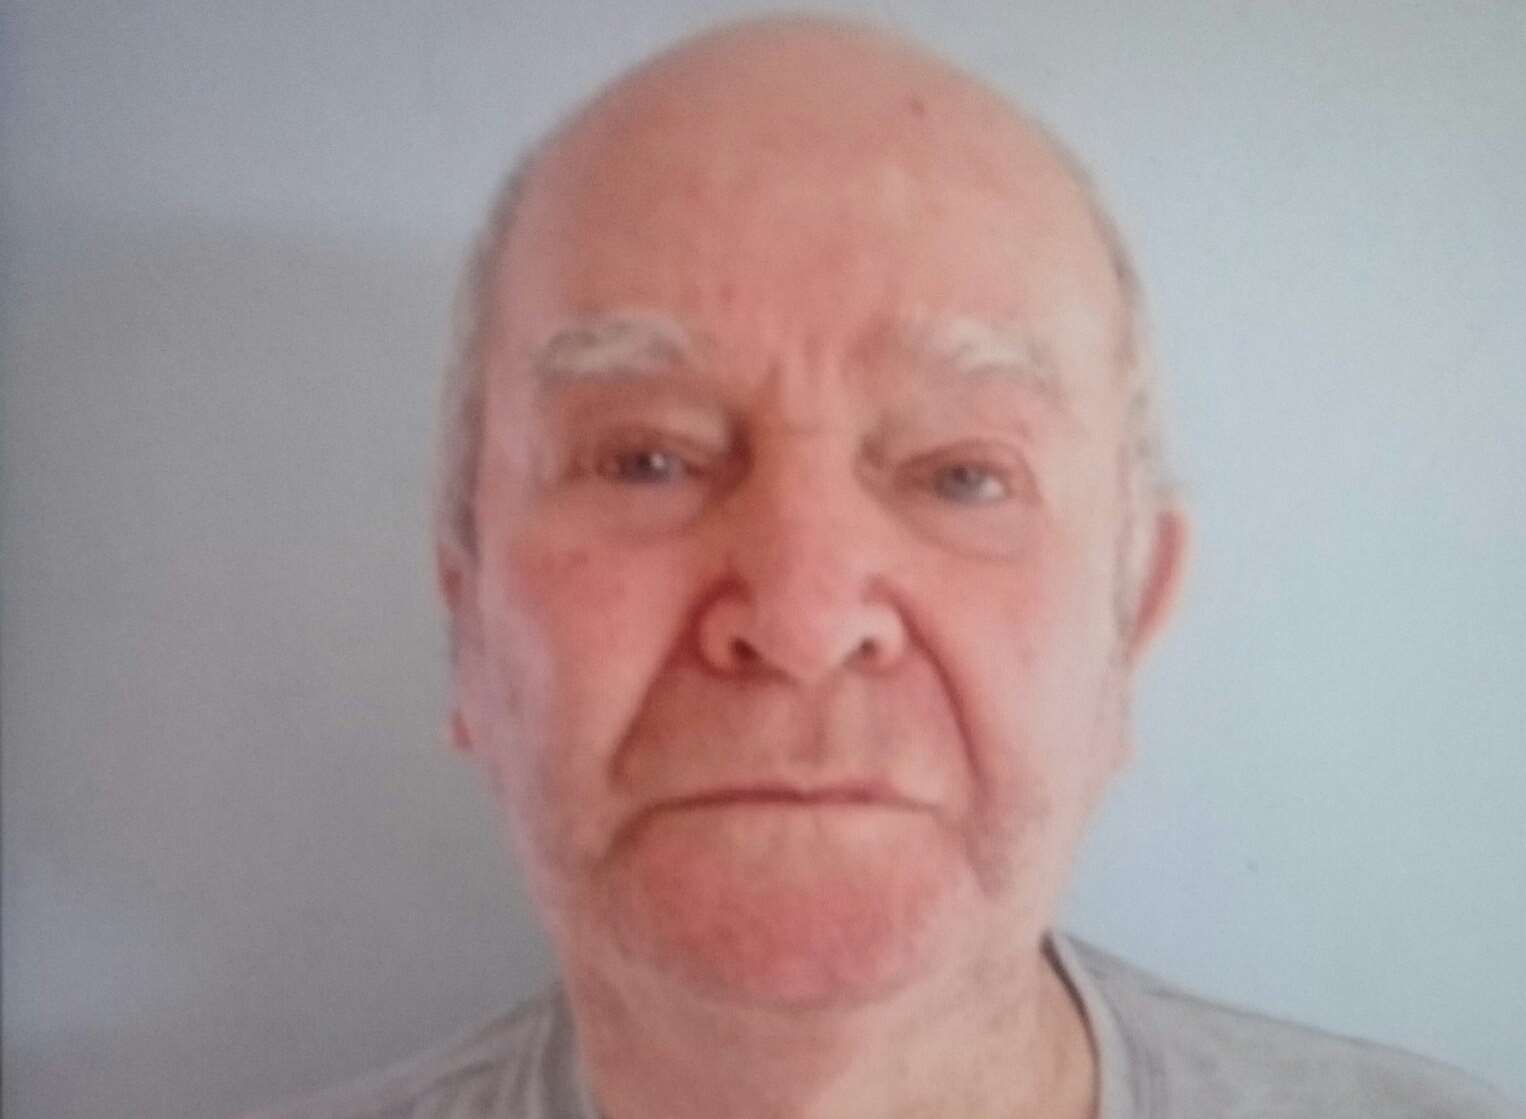 Thomas Vernon, 83, is thought to have left his home just before 5am on Tuesday June 2.